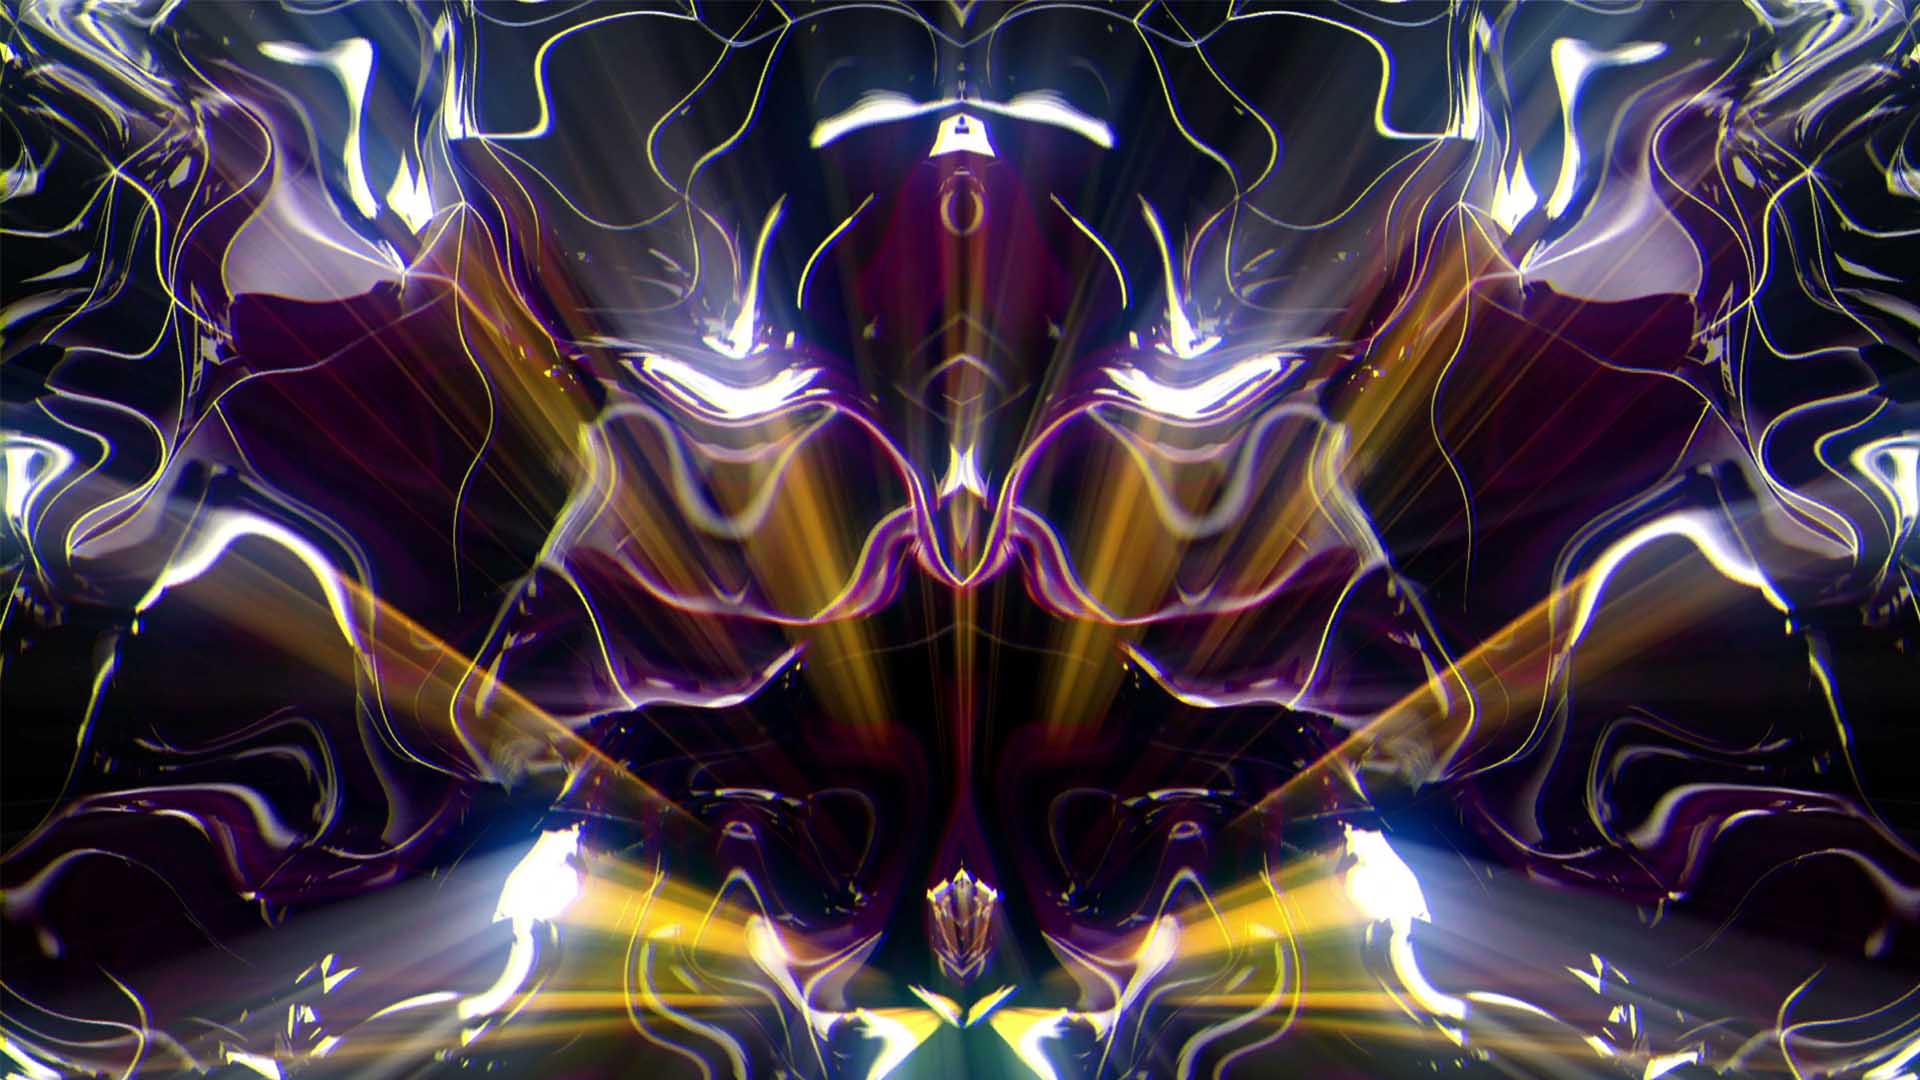 Psychedelic_VJ_Loop_Motion_Background_Royalty_Free_Video